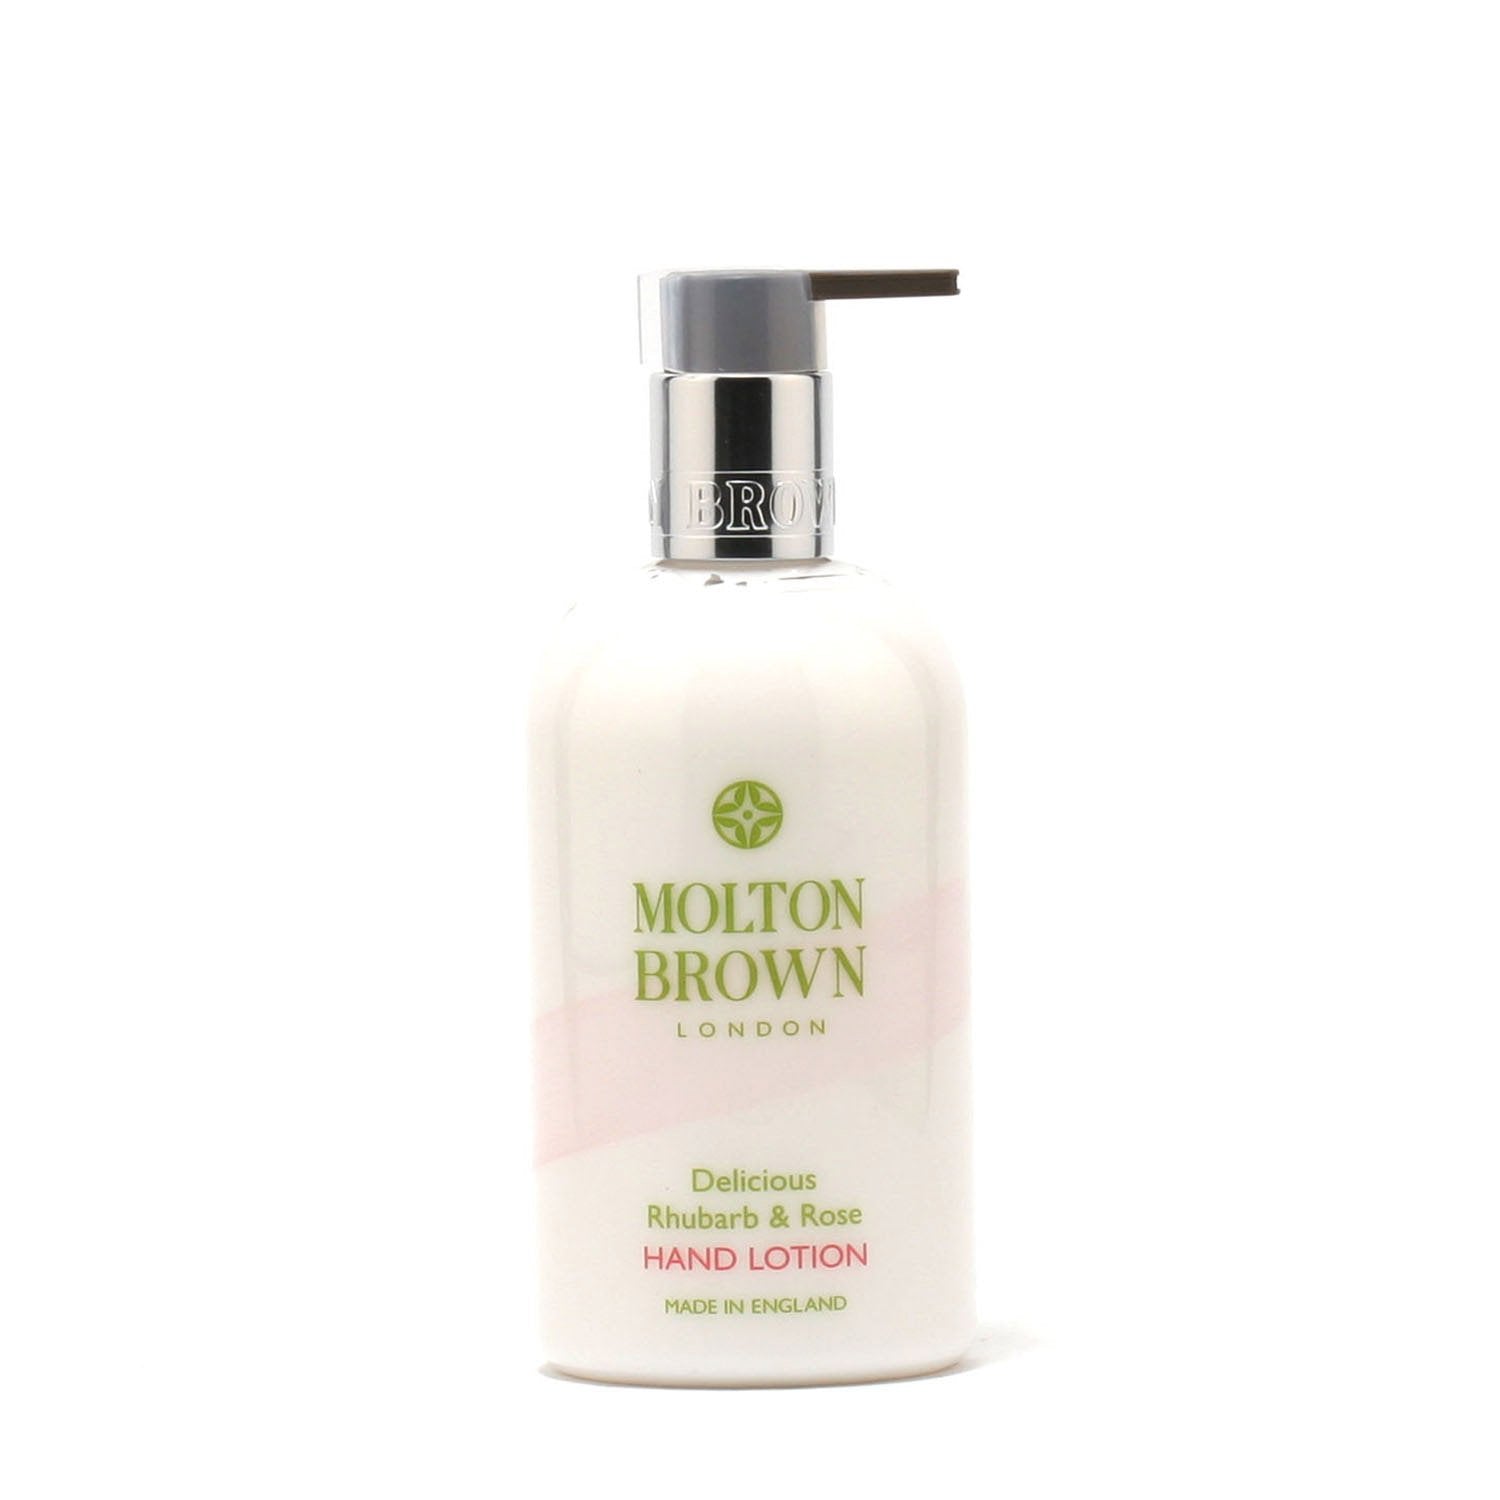 Bath And Body - MOLTON BROWN DELICIOUS RHUBARB & ROSE HAND LOTION, 10.0 OZ